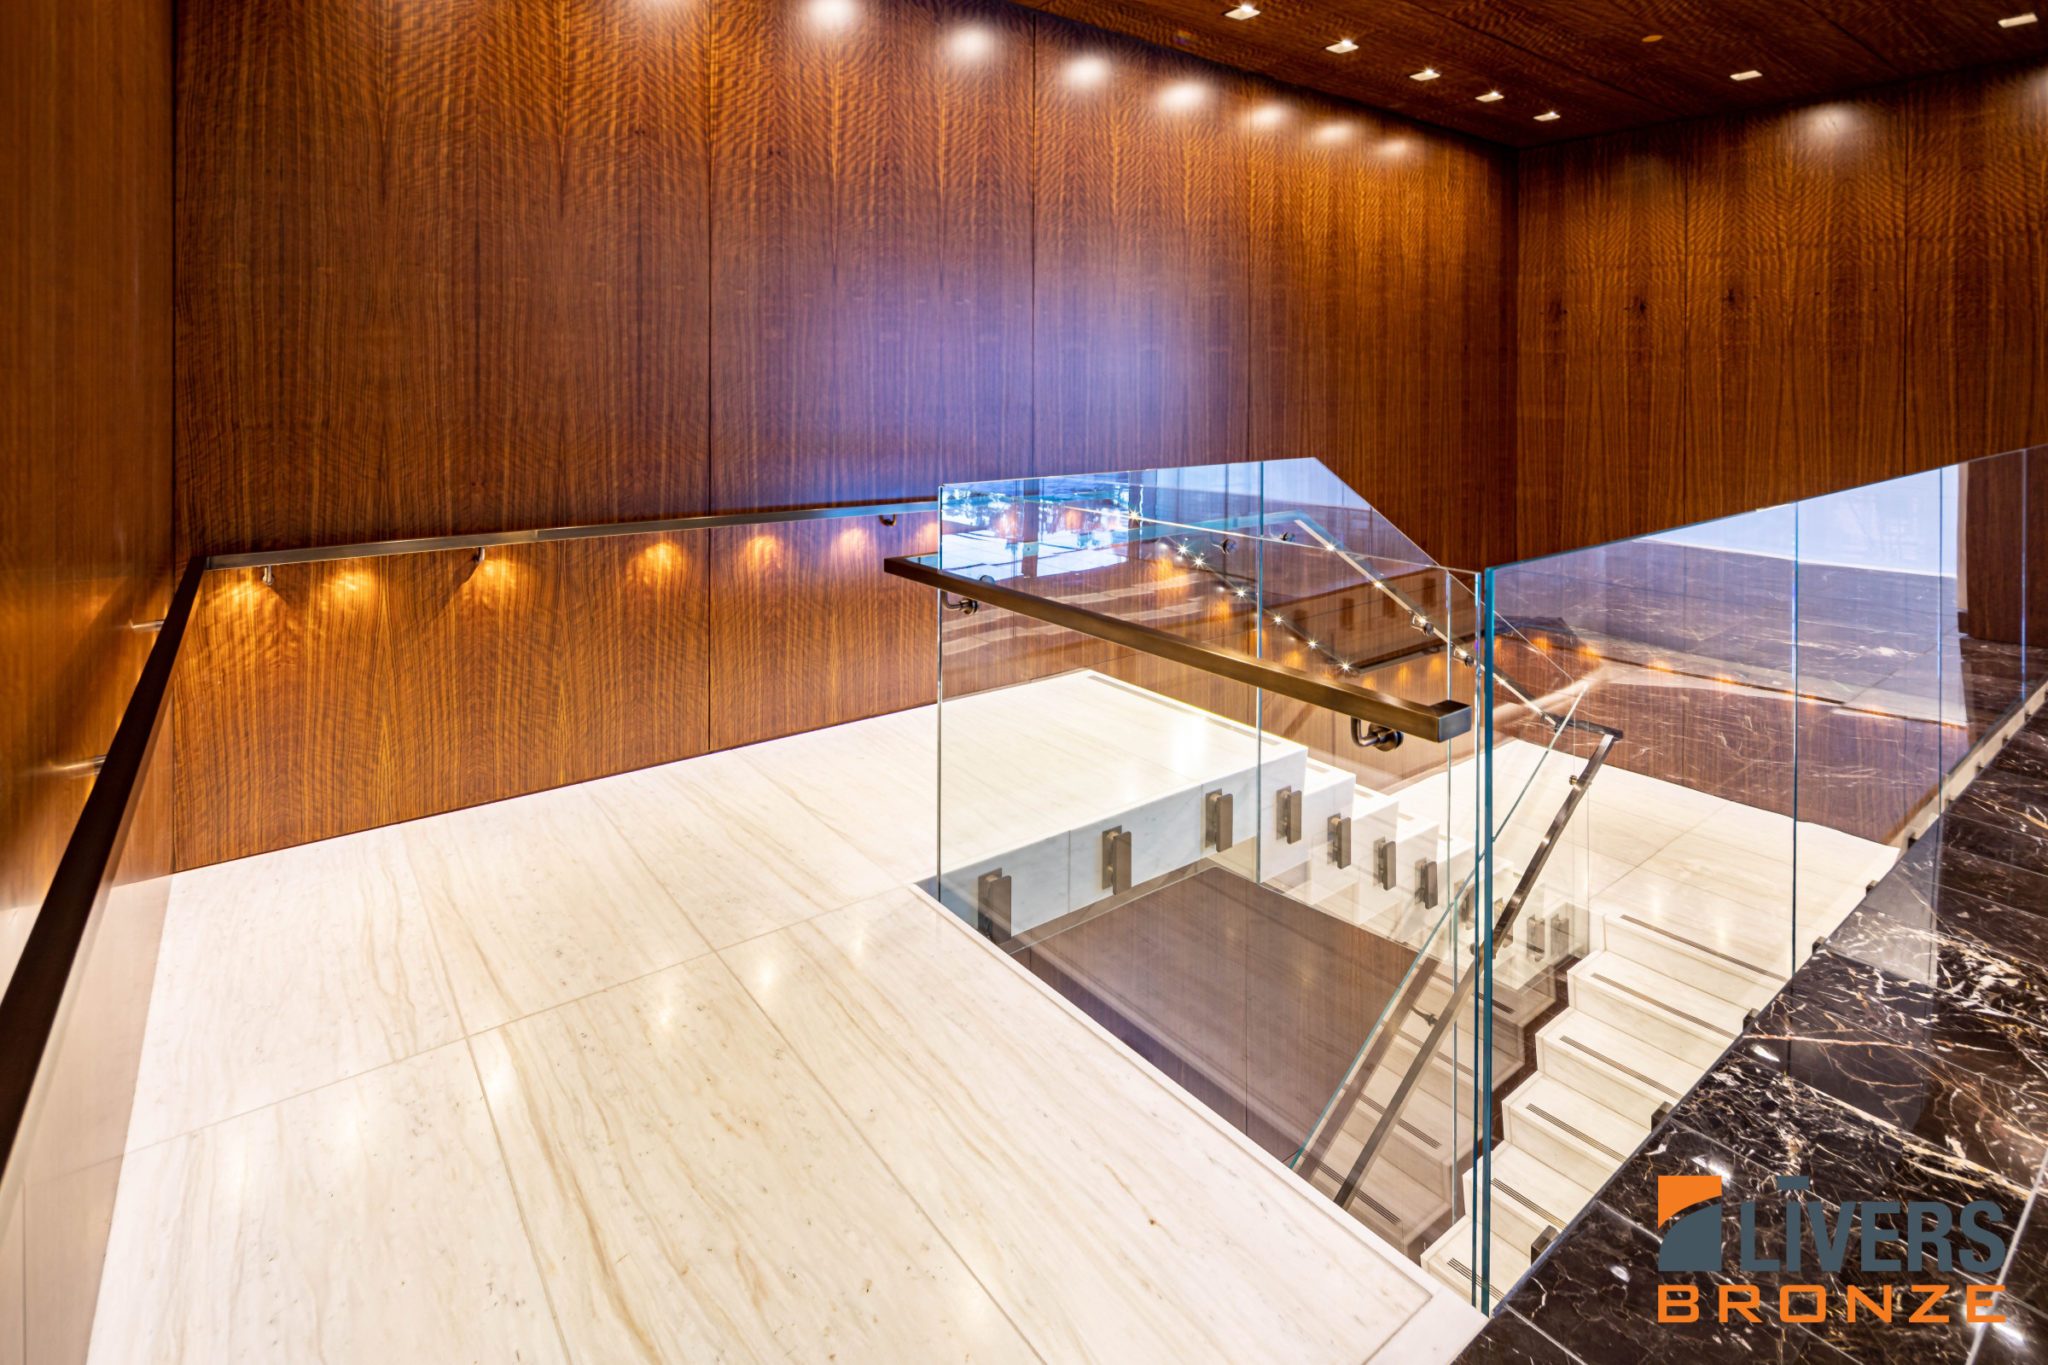 Livers Bronze Blok Commercial Glass Railing installed in the lobby of the Trammell Crow Center in downtown Dallas Texas and is made in the USA